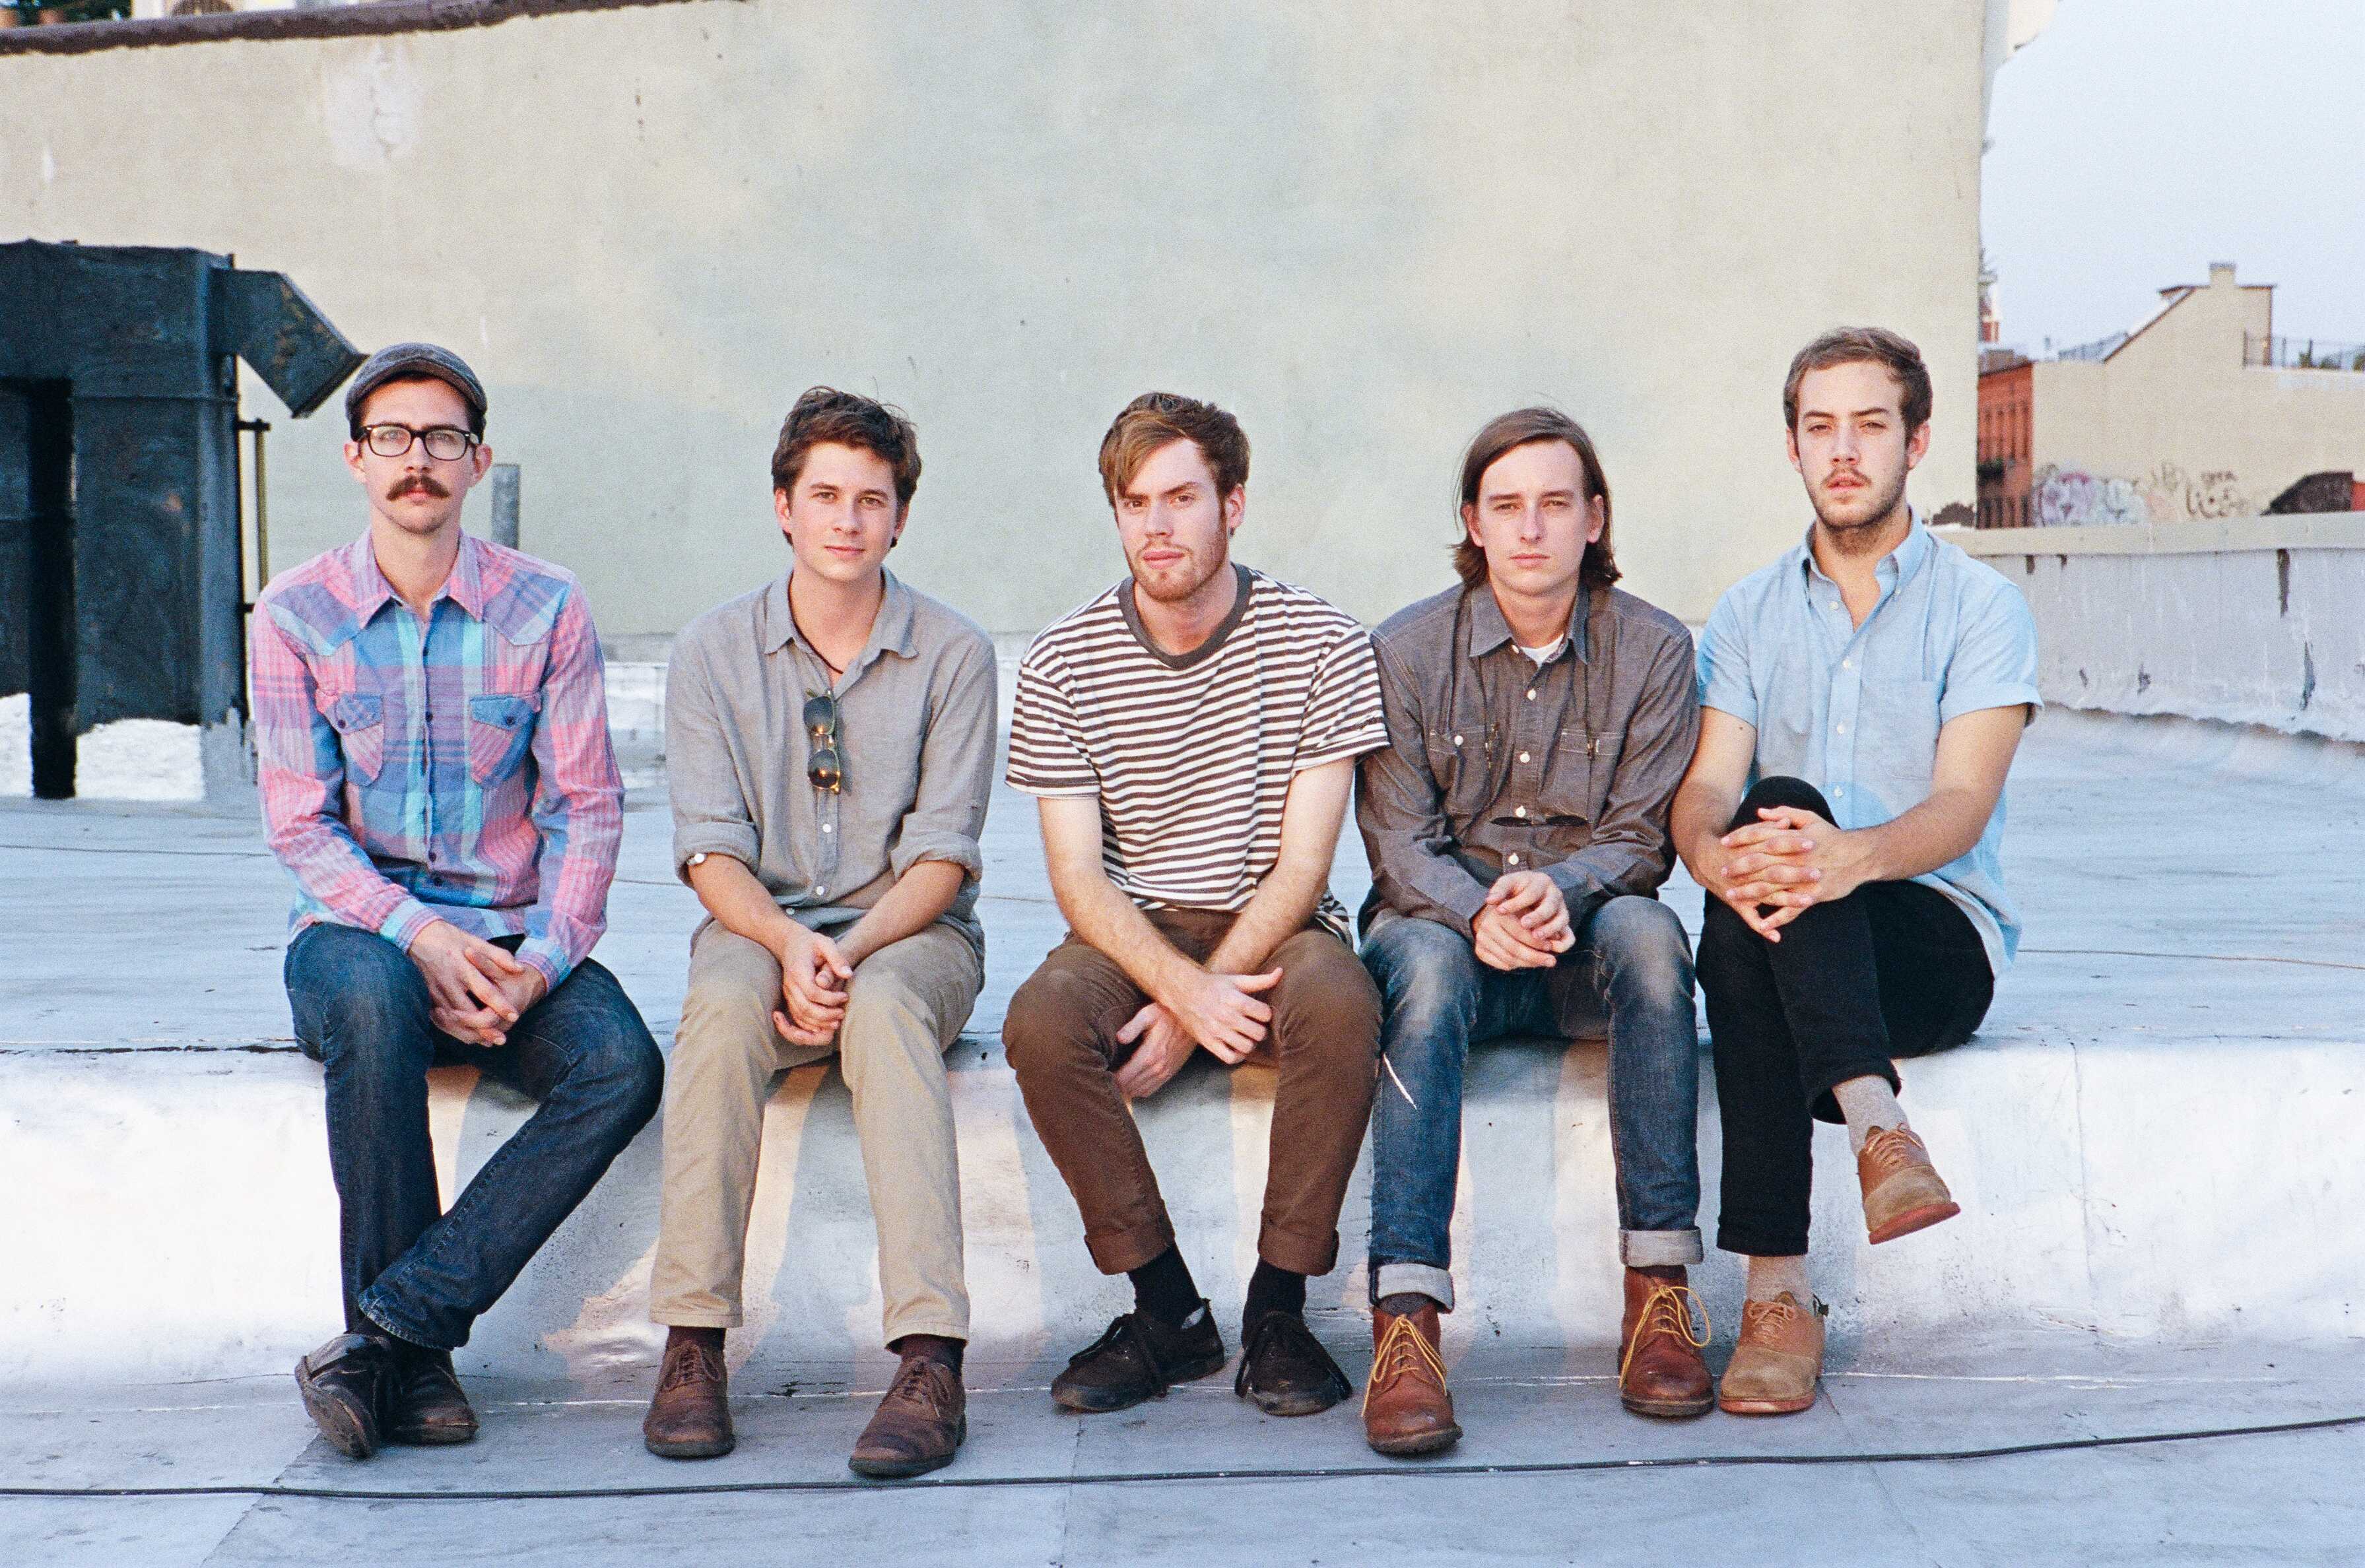 Wild Nothing casts a synthrock spell over indie rockers The